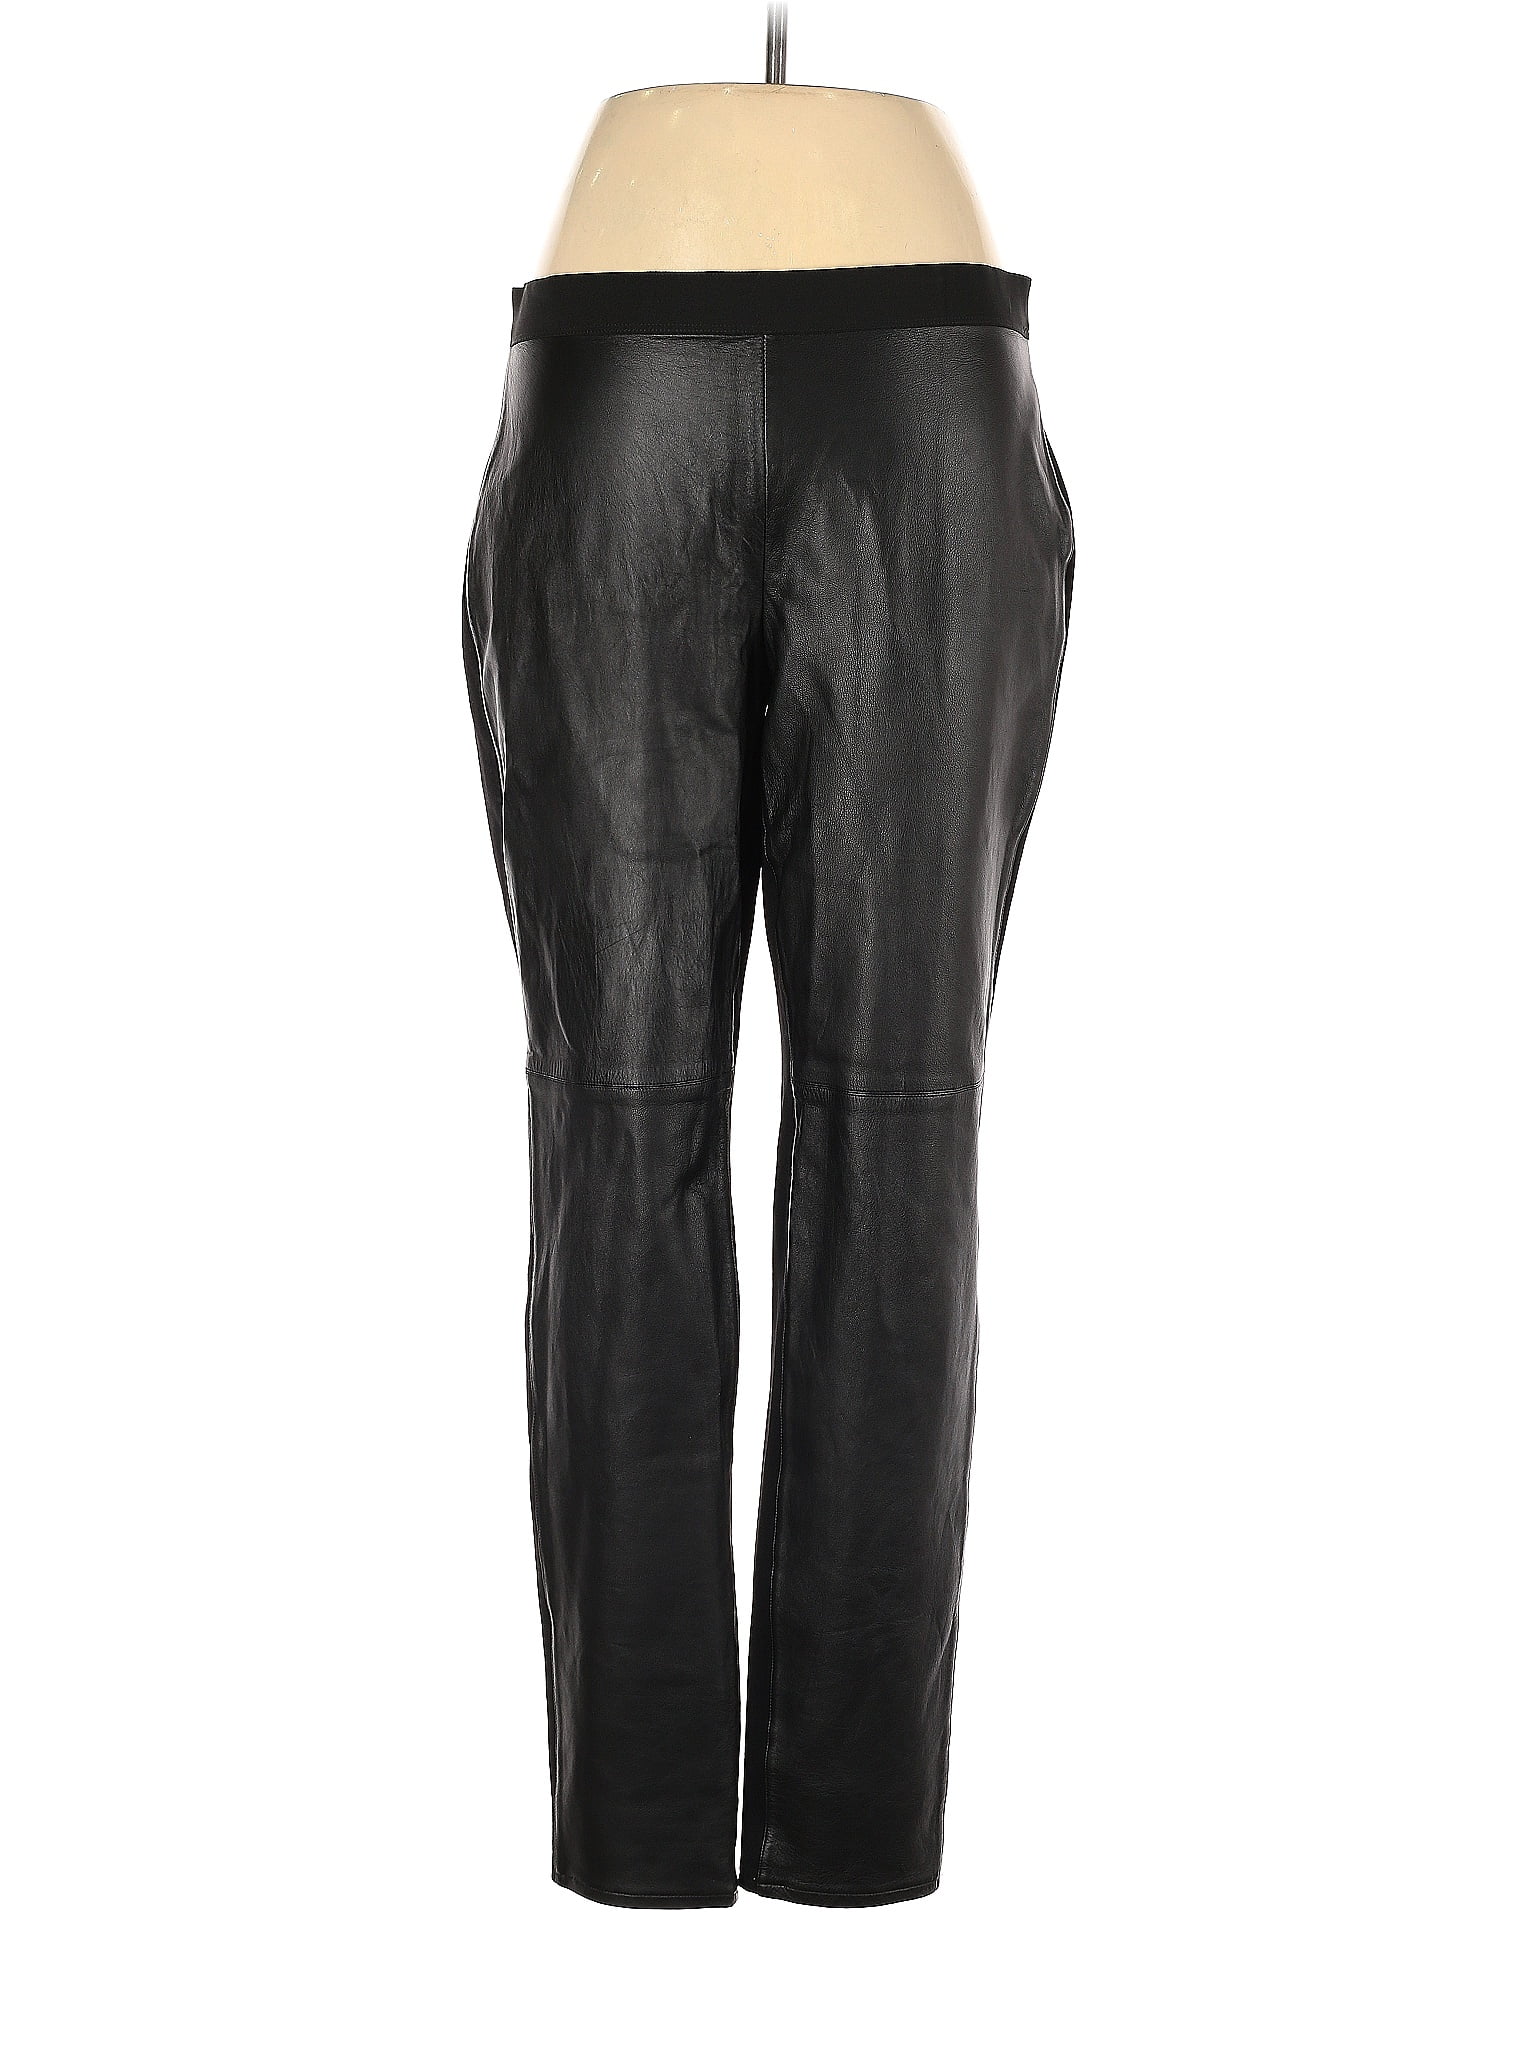 Eileen Fisher 100% Leather Solid Black Leather Pants Size M - 73% off ...